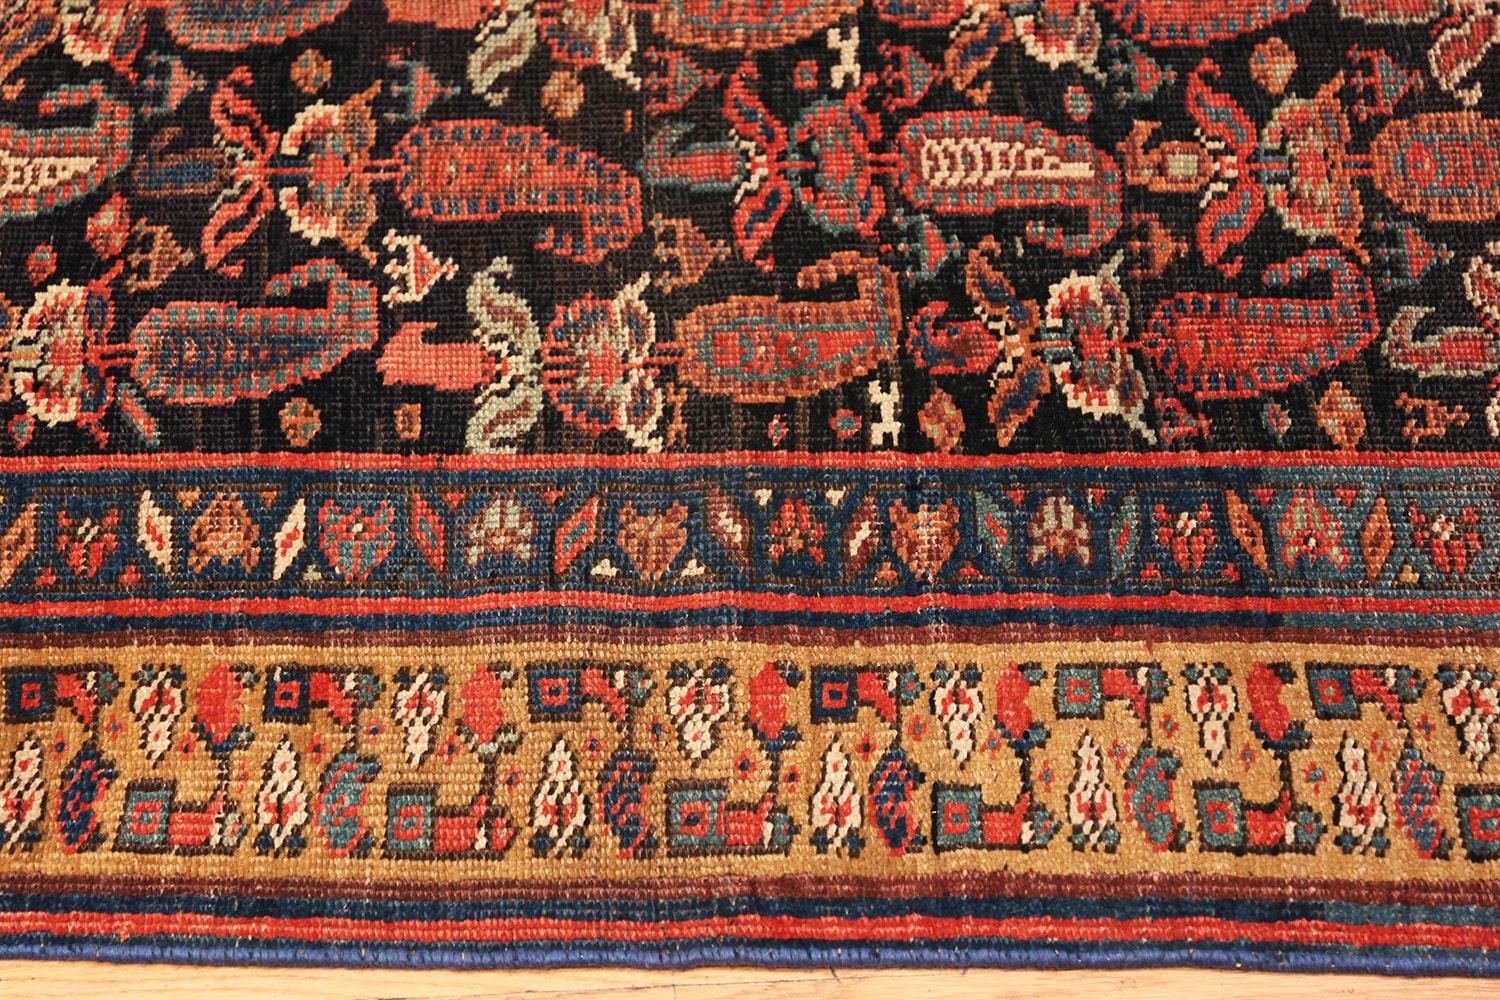 Amazing Antique Bidjar runner carpet, Persia, 1920 - Size: 3 ft. 2 in x 12 ft. 9 in (0.97 m x 3.89 m).

This stunning carpet features a relatively simple pattern that only accentuates the remarkable degree of craftsmanship present in every stitch.